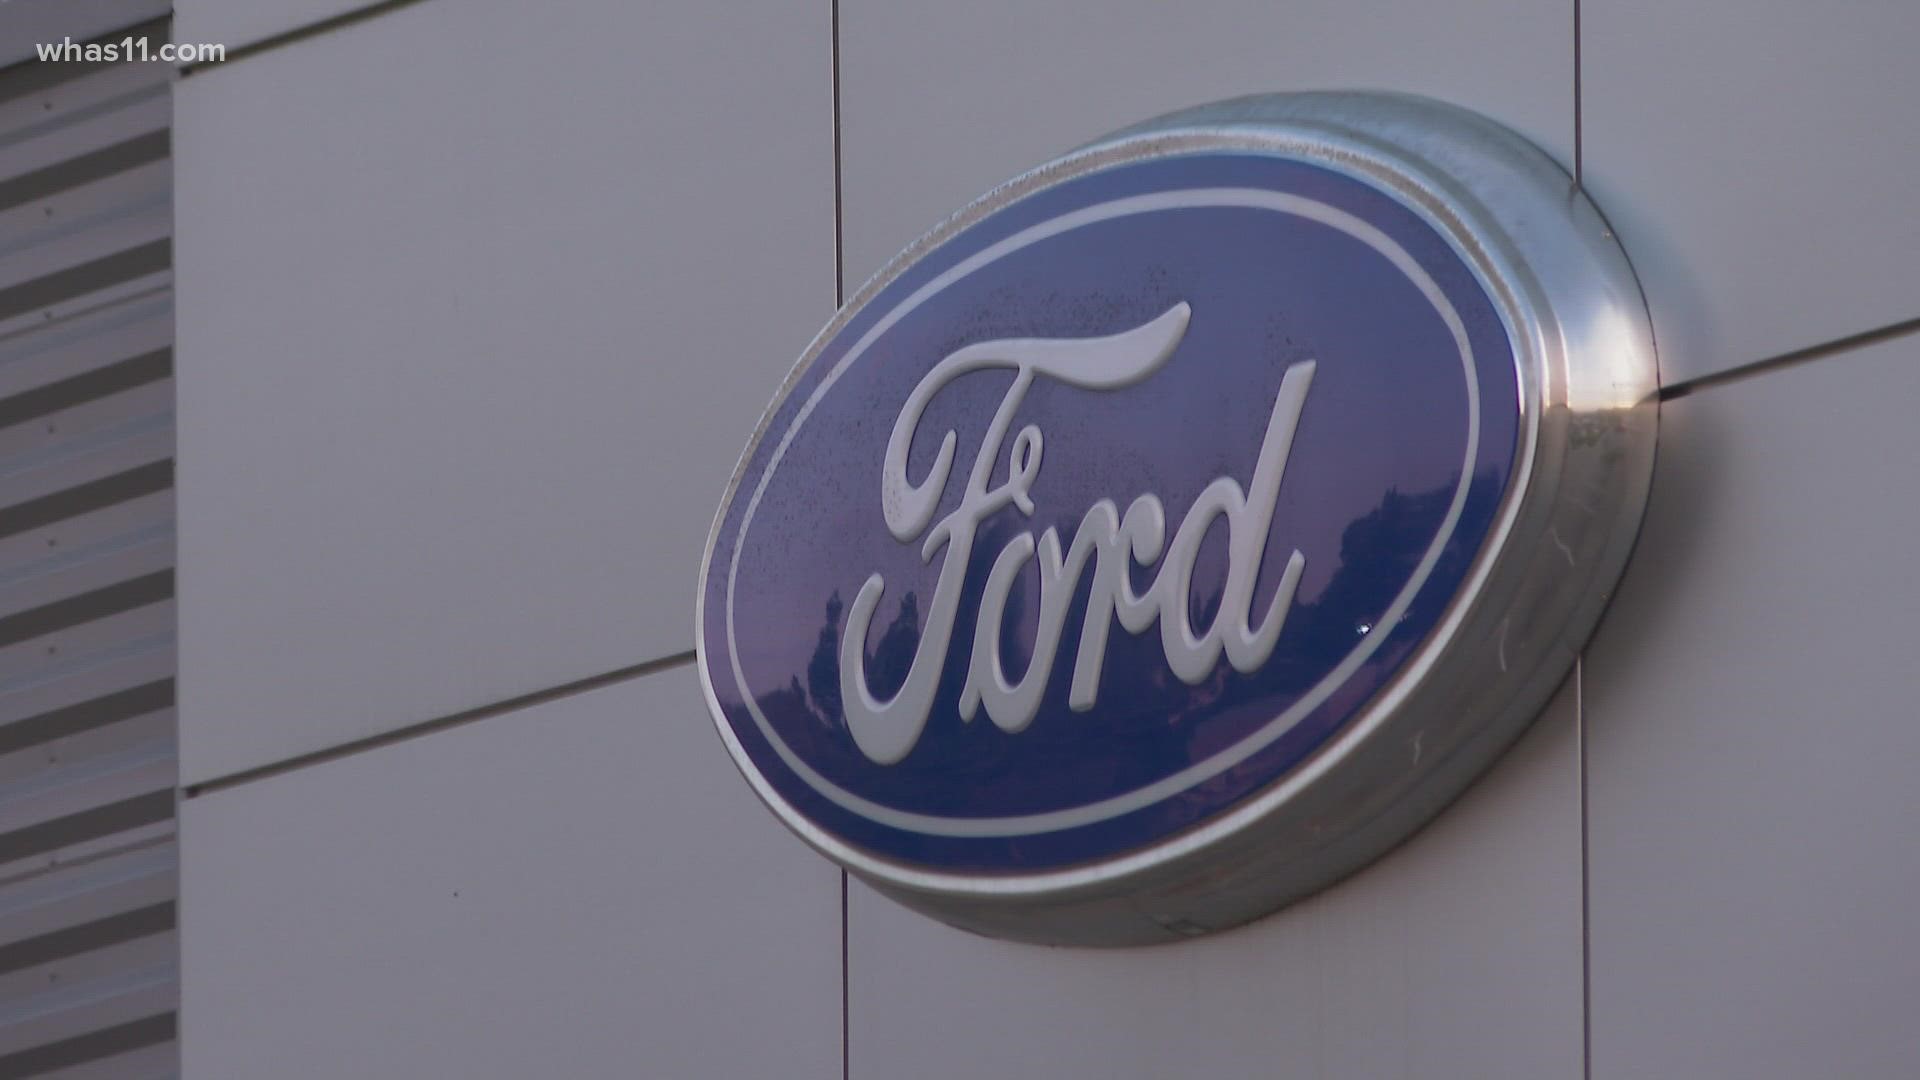 Dealerships see demands for electric cars as Ford plant commits to eco-friendly manufacturing.